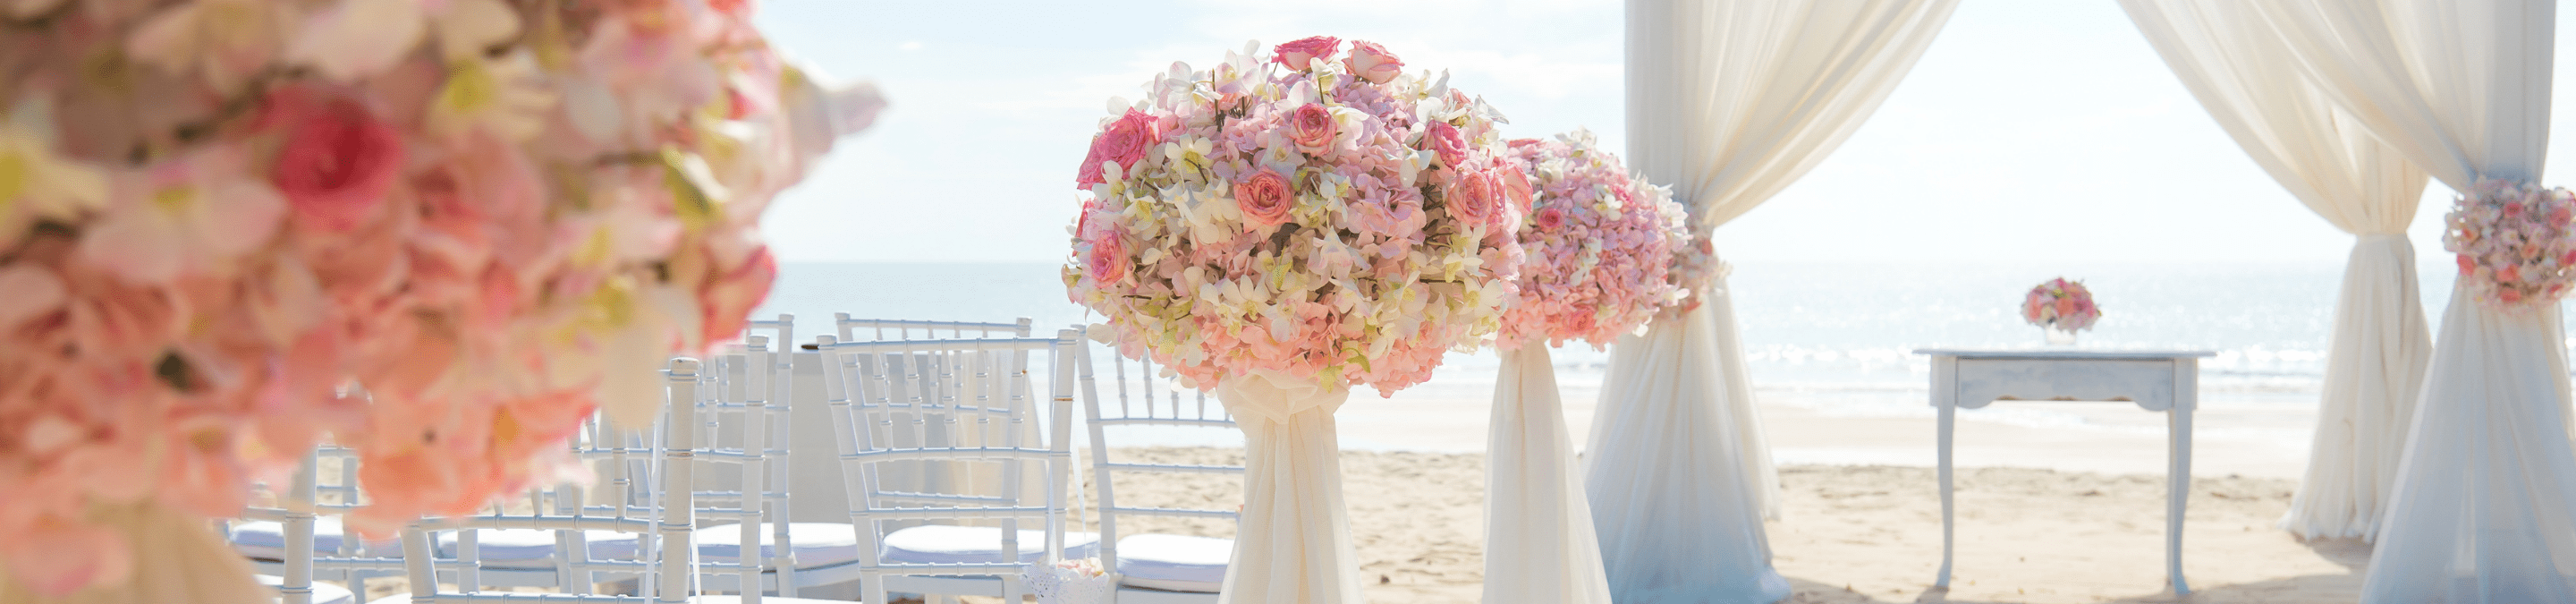 beach wedding with white bamboo chairs with large bundles of flowers lining the isle leading to a sheer curtain covered tend with small table in the middle of the text on a sunny day